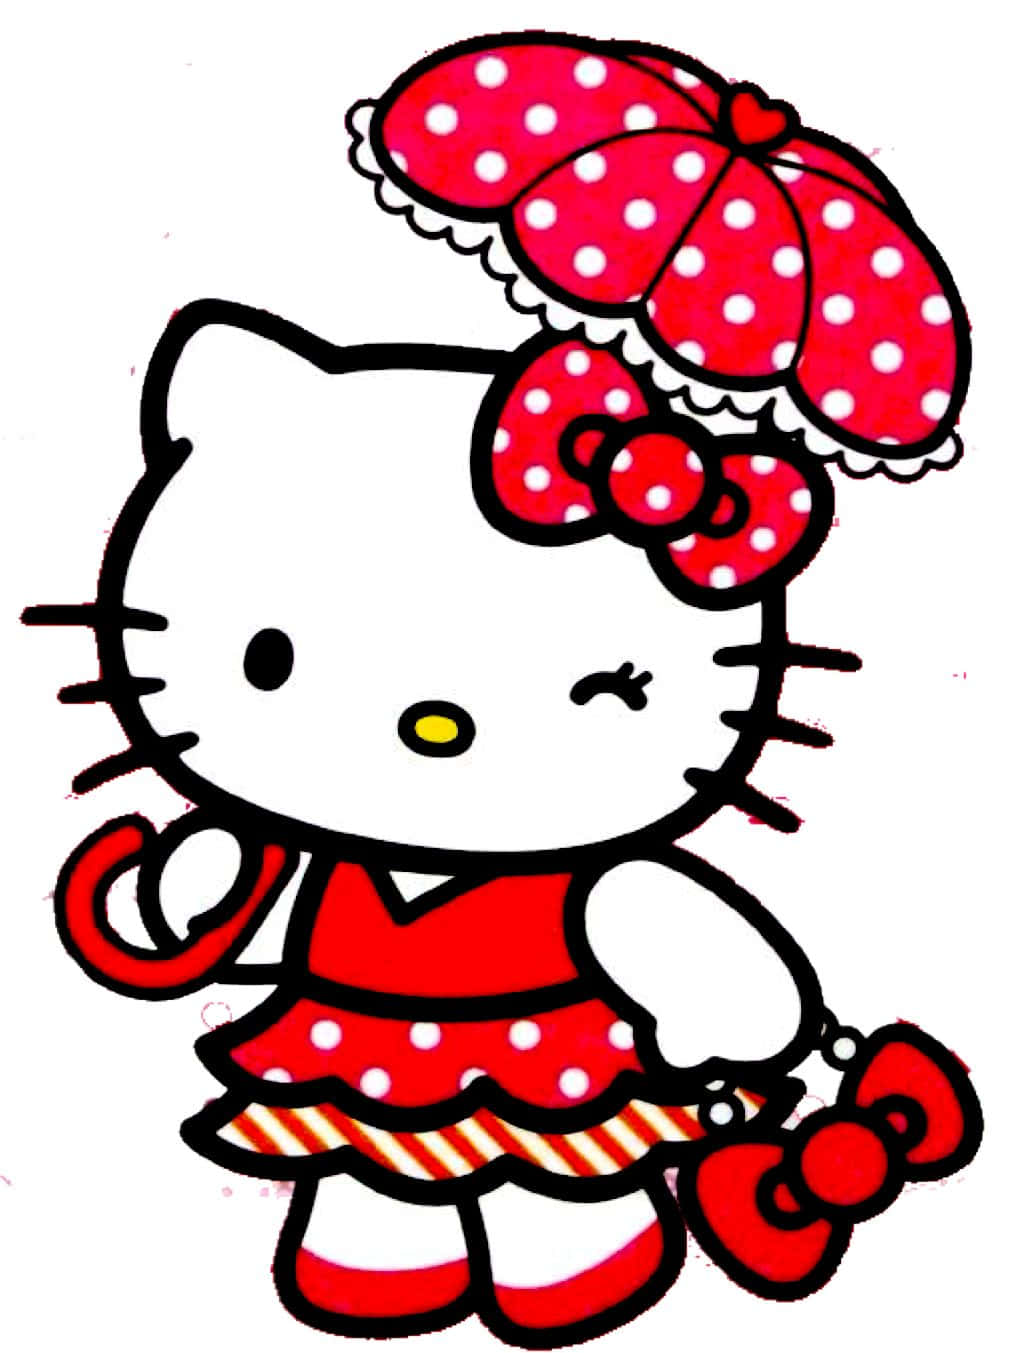 "Enjoy a cup of tea with Hello Kitty!"